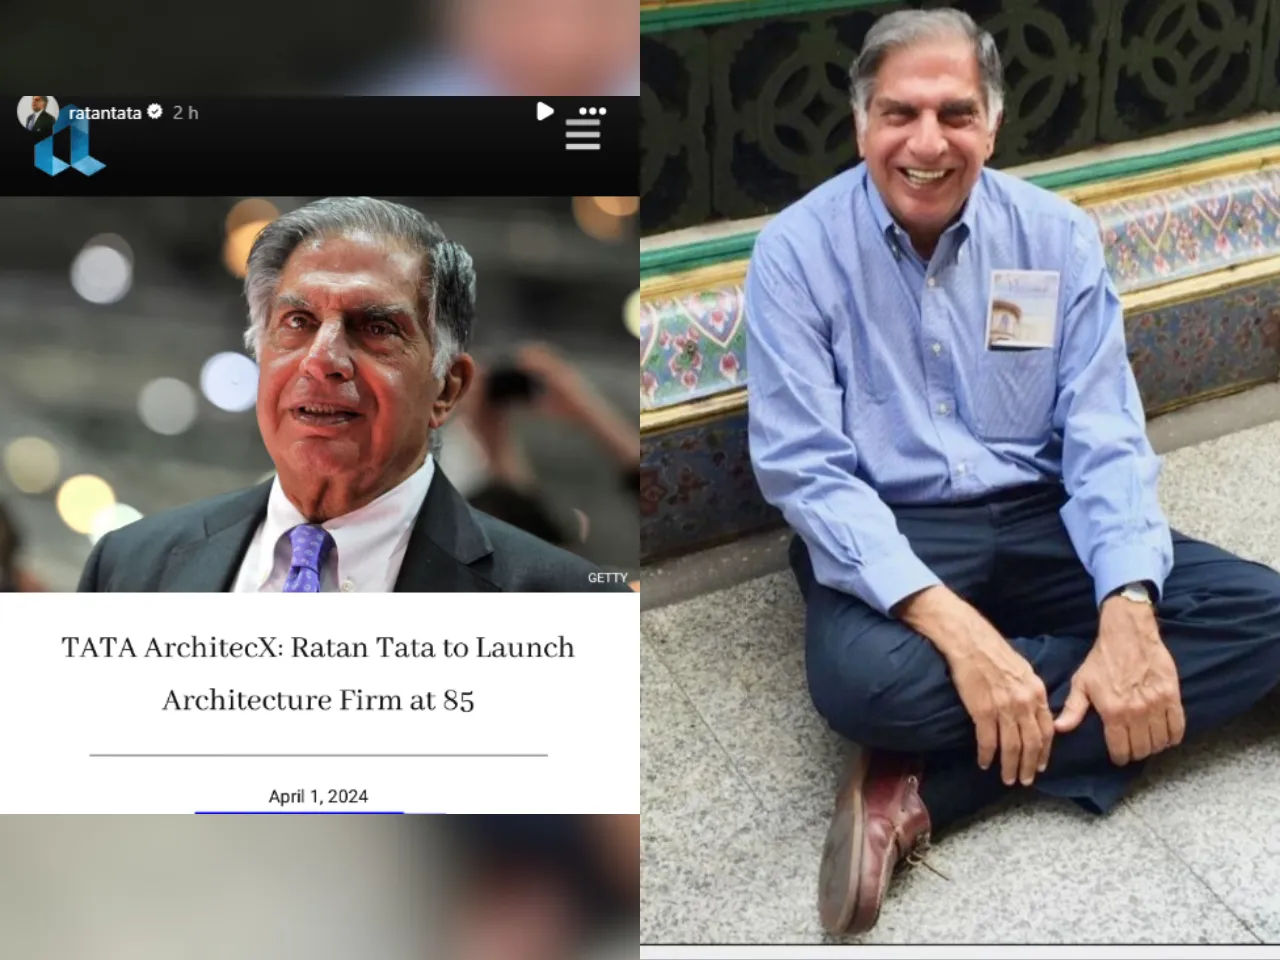 Is Ratan Tata launching an architecture firm